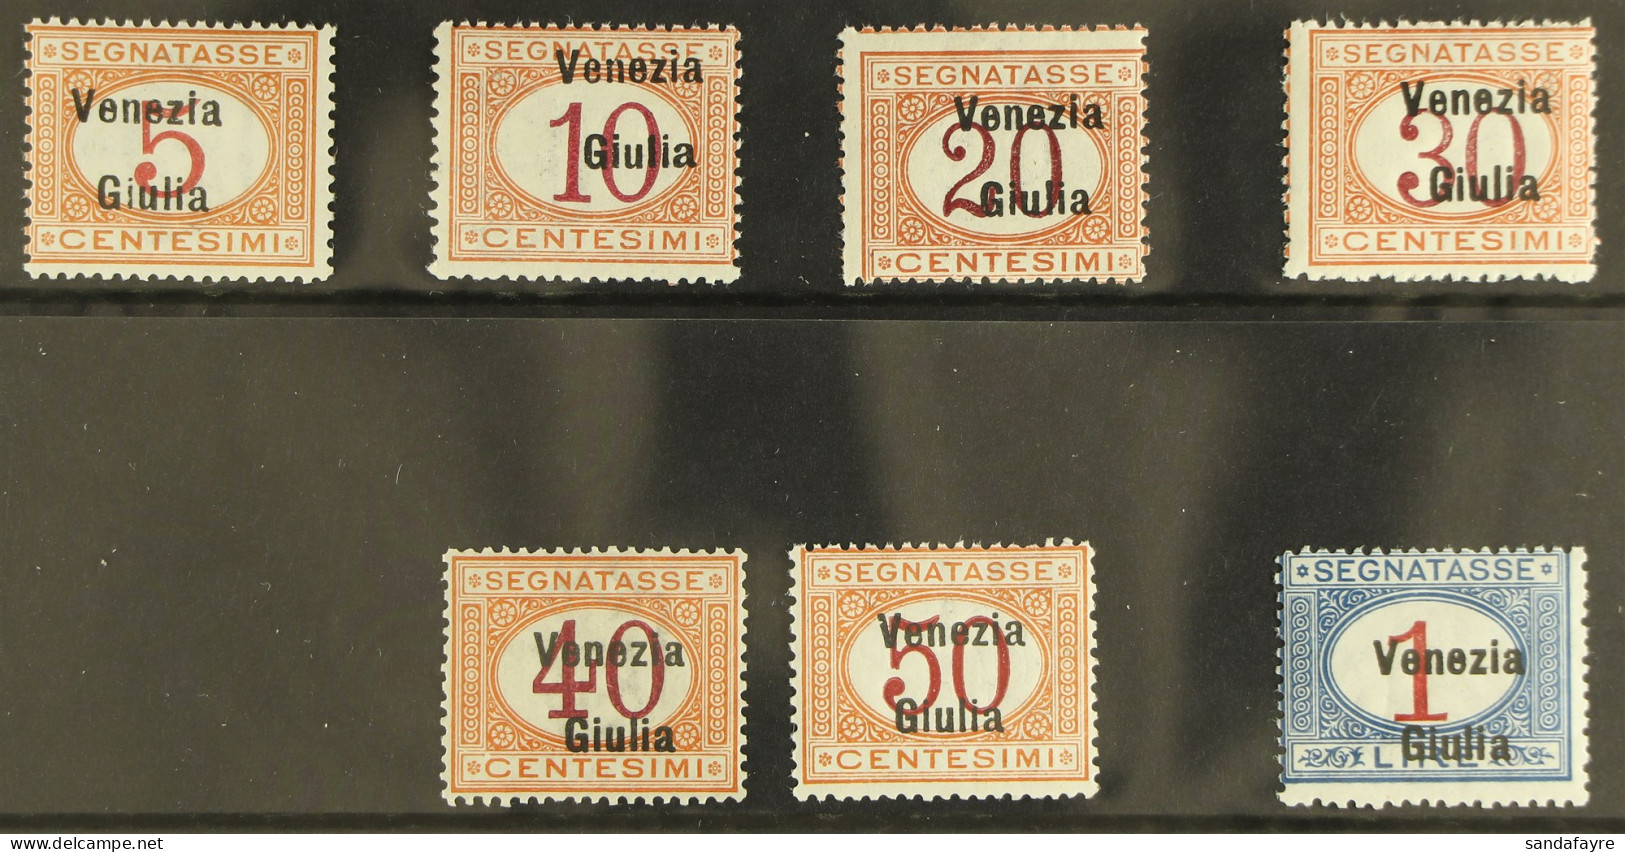 VENEZIA GIULIA Postage Due 1918 Complete Set, Sassone S4, Never Hinged Mint. Cat. ??2500 (7 Stamps) - Ohne Zuordnung